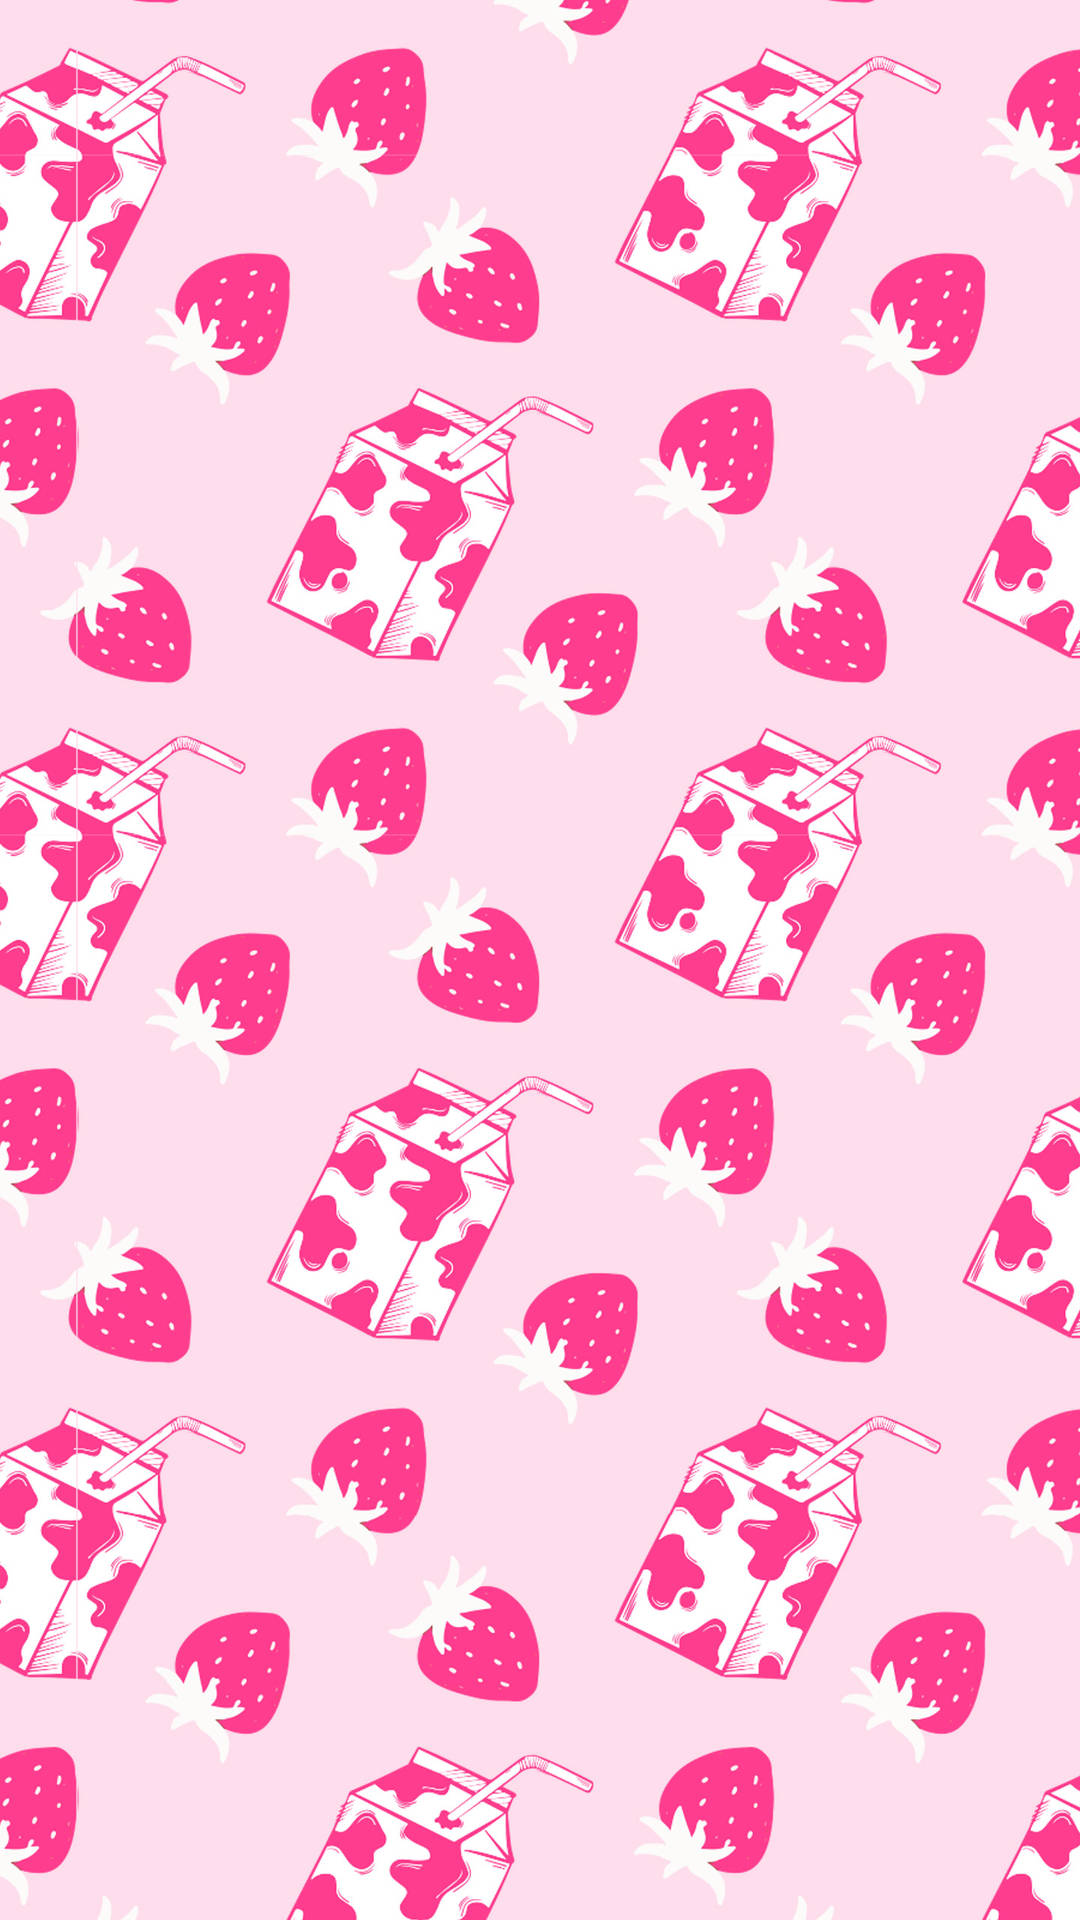 Details 52+ strawberry cow wallpapers - in.cdgdbentre